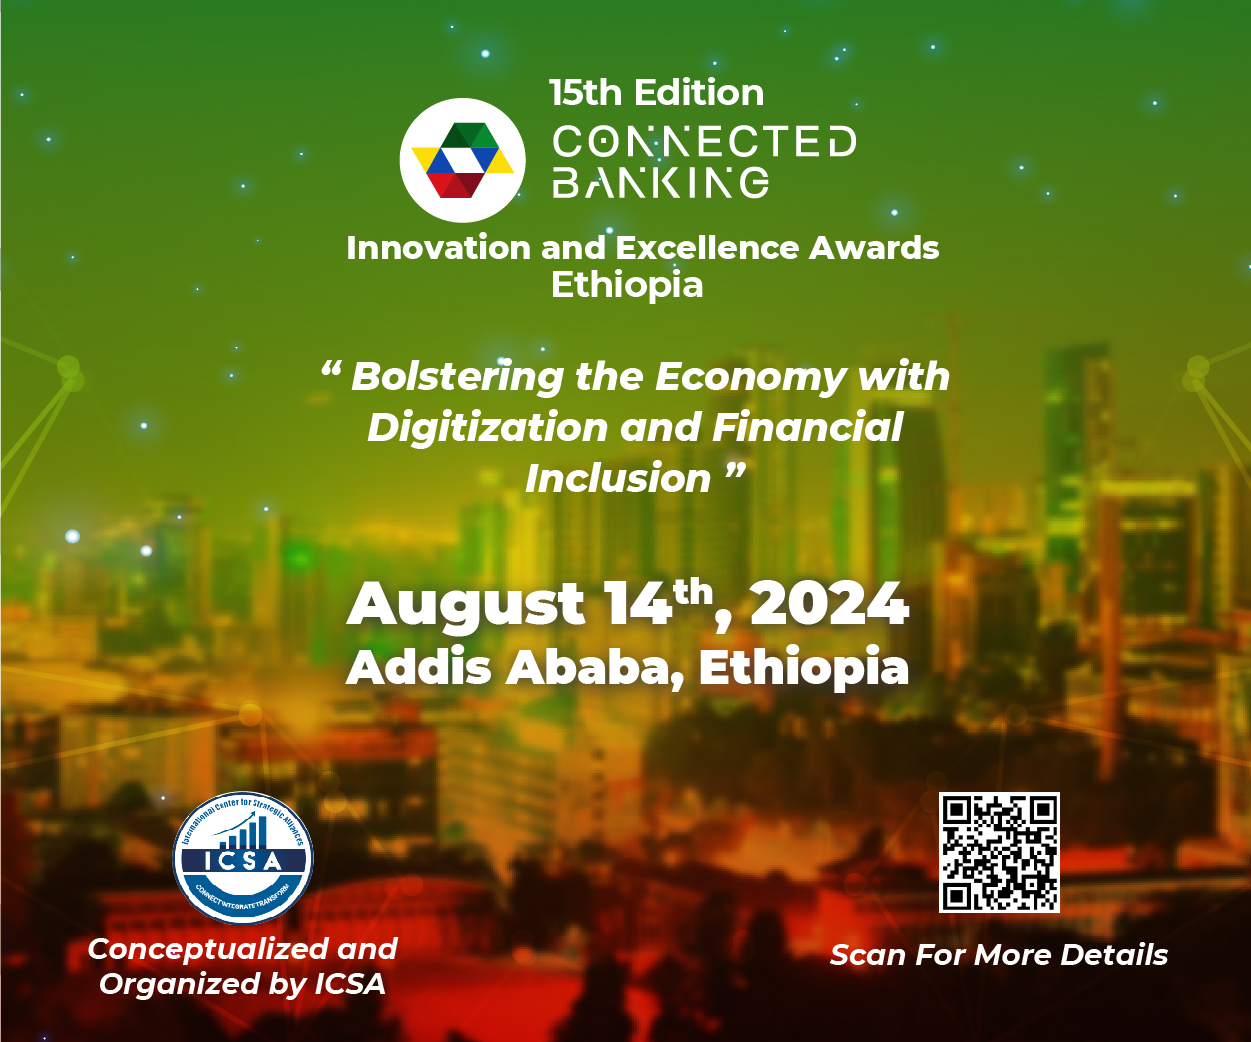 15th Edition Connected Banking Summit – Innovation and Excellence Awards 2024; Ethiopia organized by International Center for Strategic Alliance